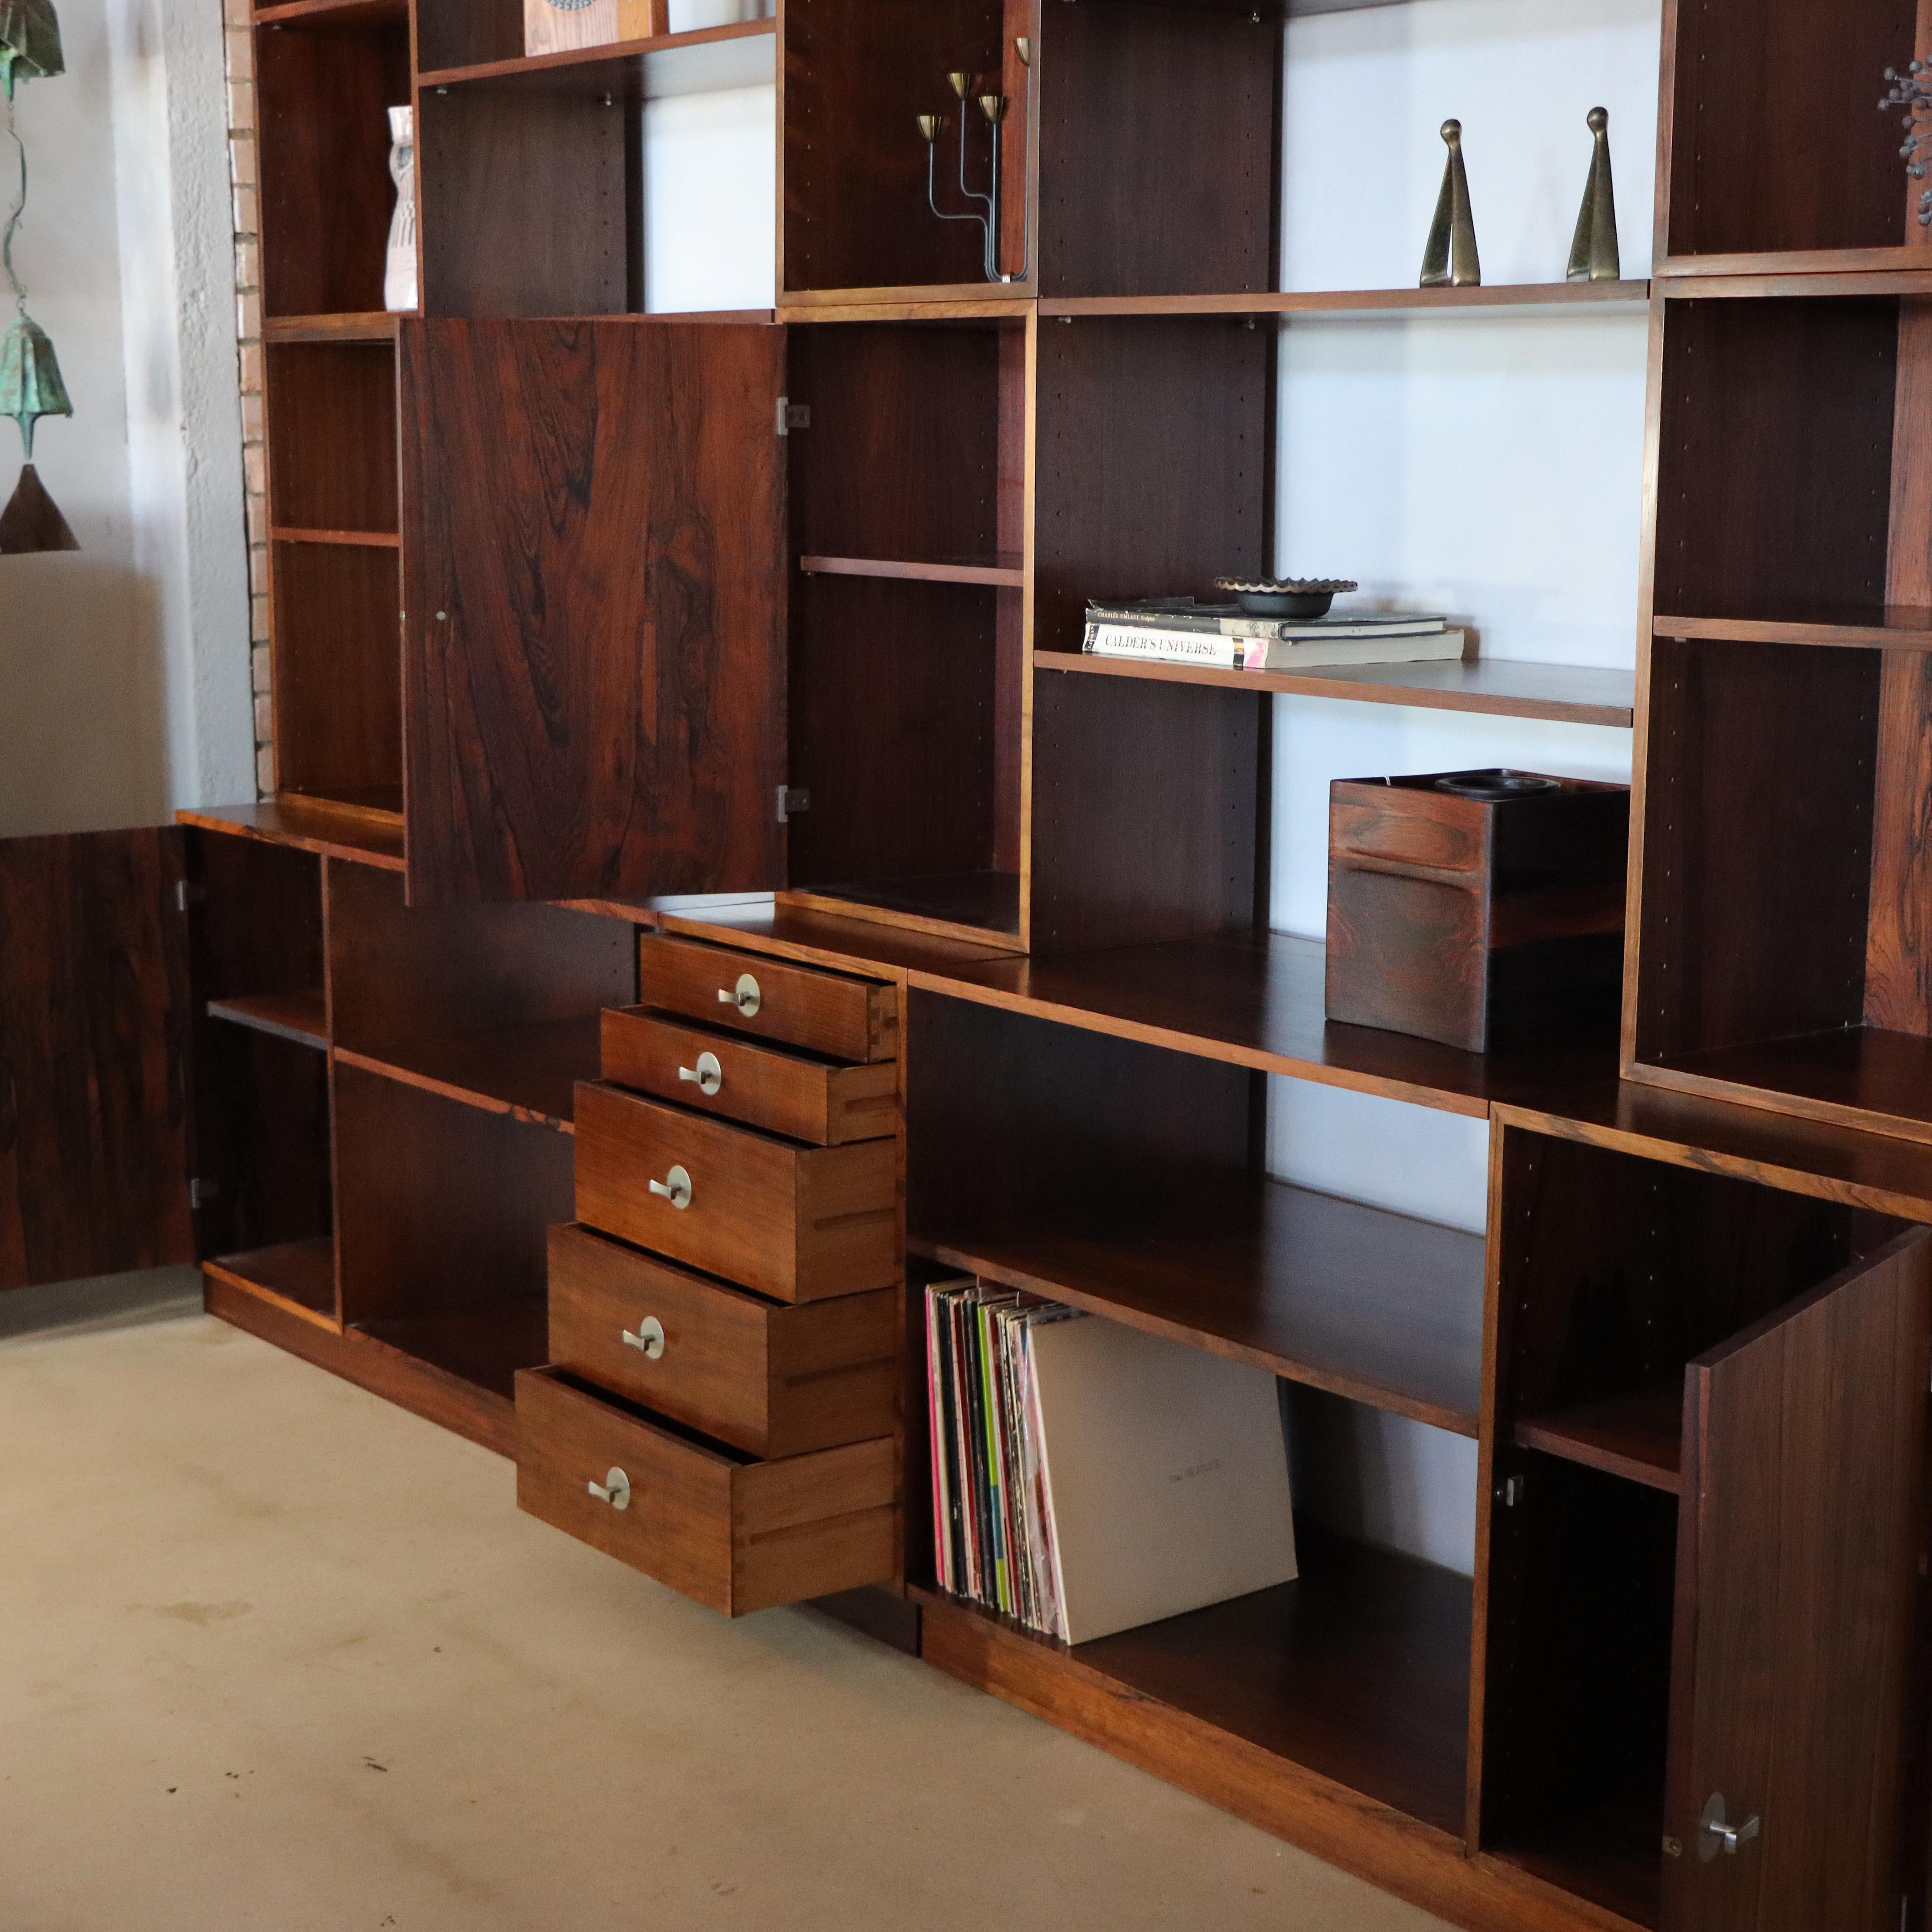 Modular wall system designed by Finn Juhl for France & Son, c. 1966. Normally seen in teak, this Brazilian Rosewood example is stunning beautiful. 

This unit consists of three closed cabinets, one chest of drawers, and multiple shelves. Each box